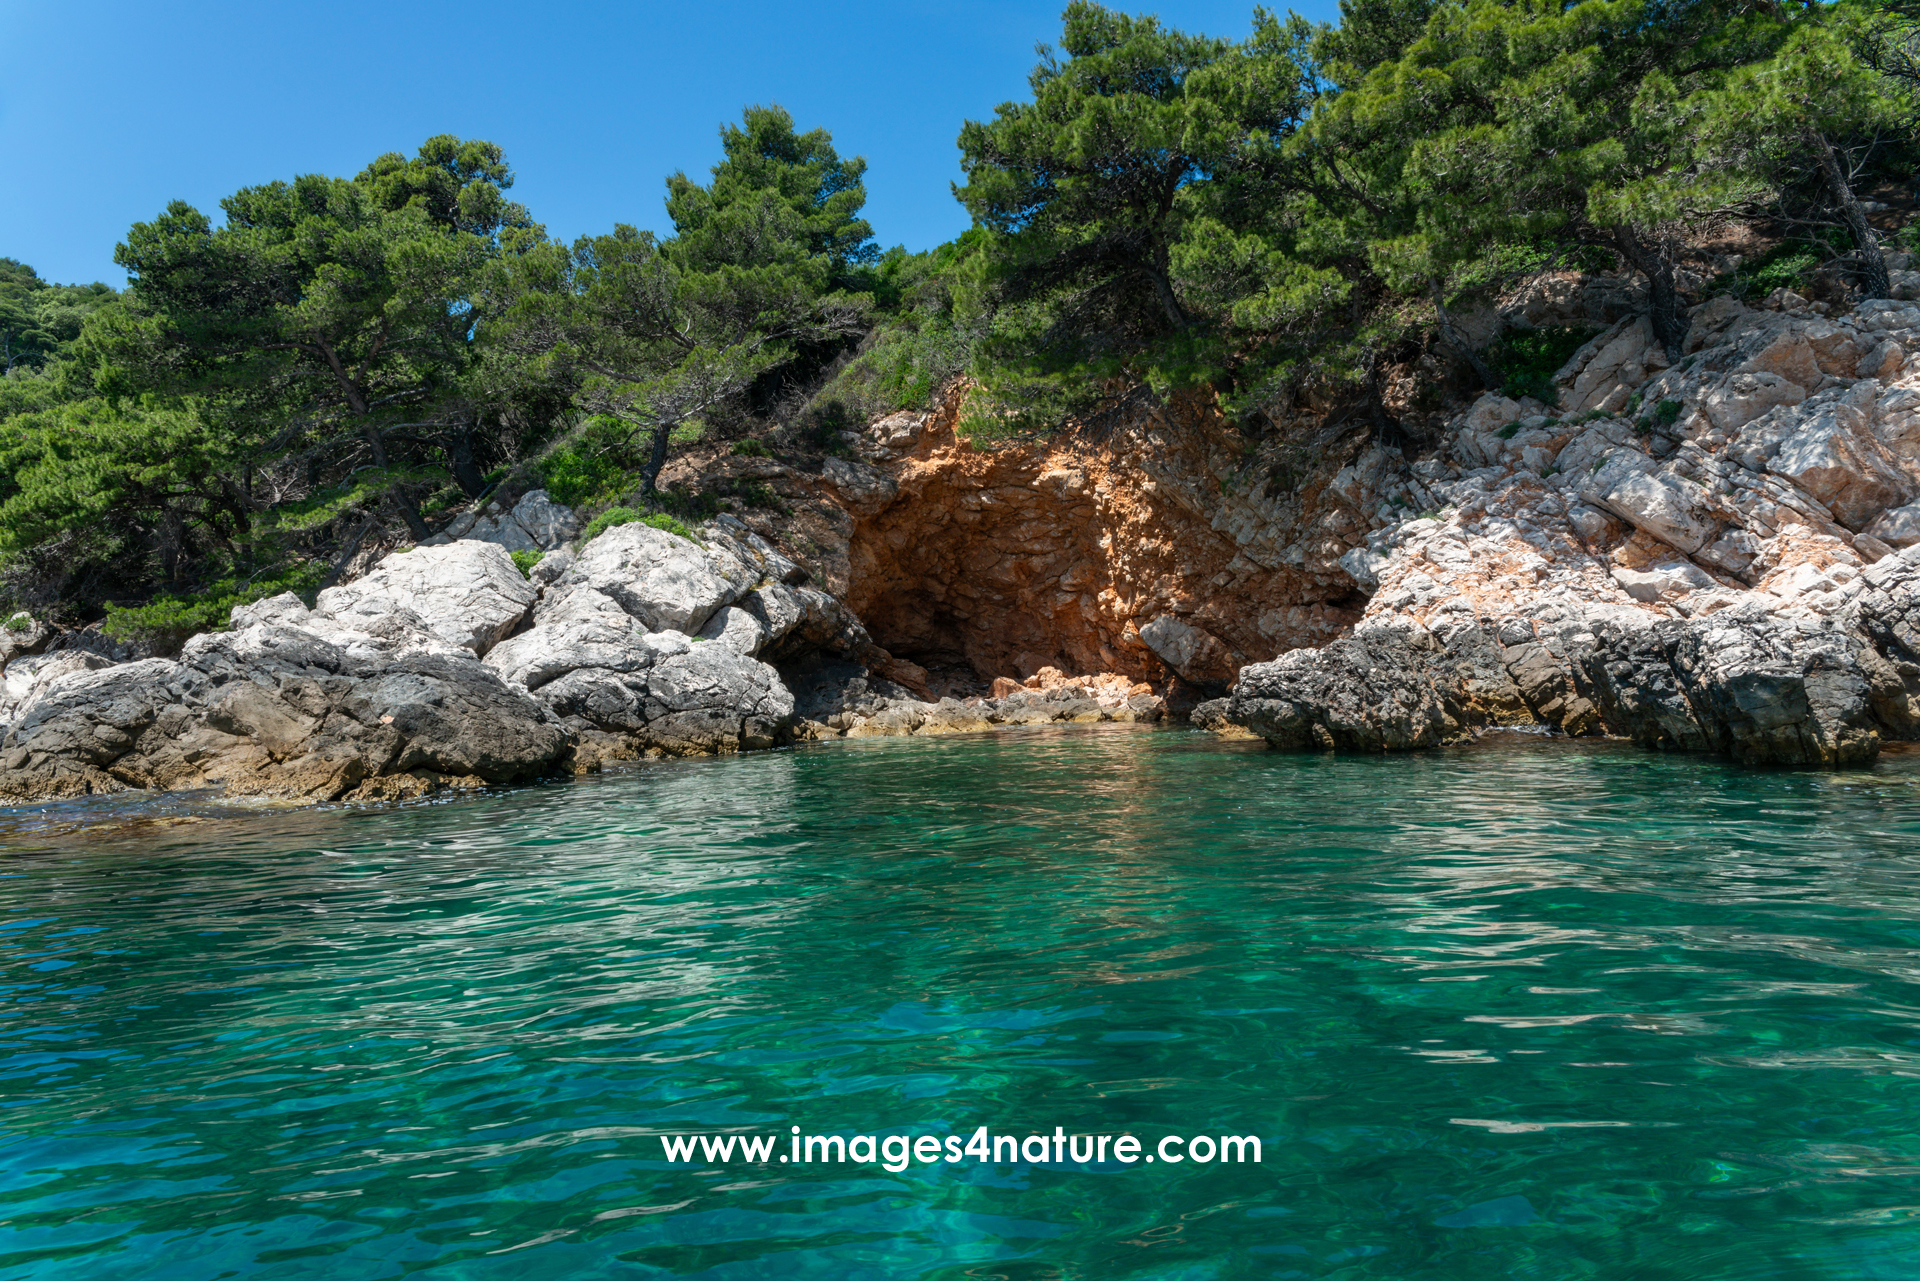 Beautiful coastline with colorful rocks, pine trees and cave